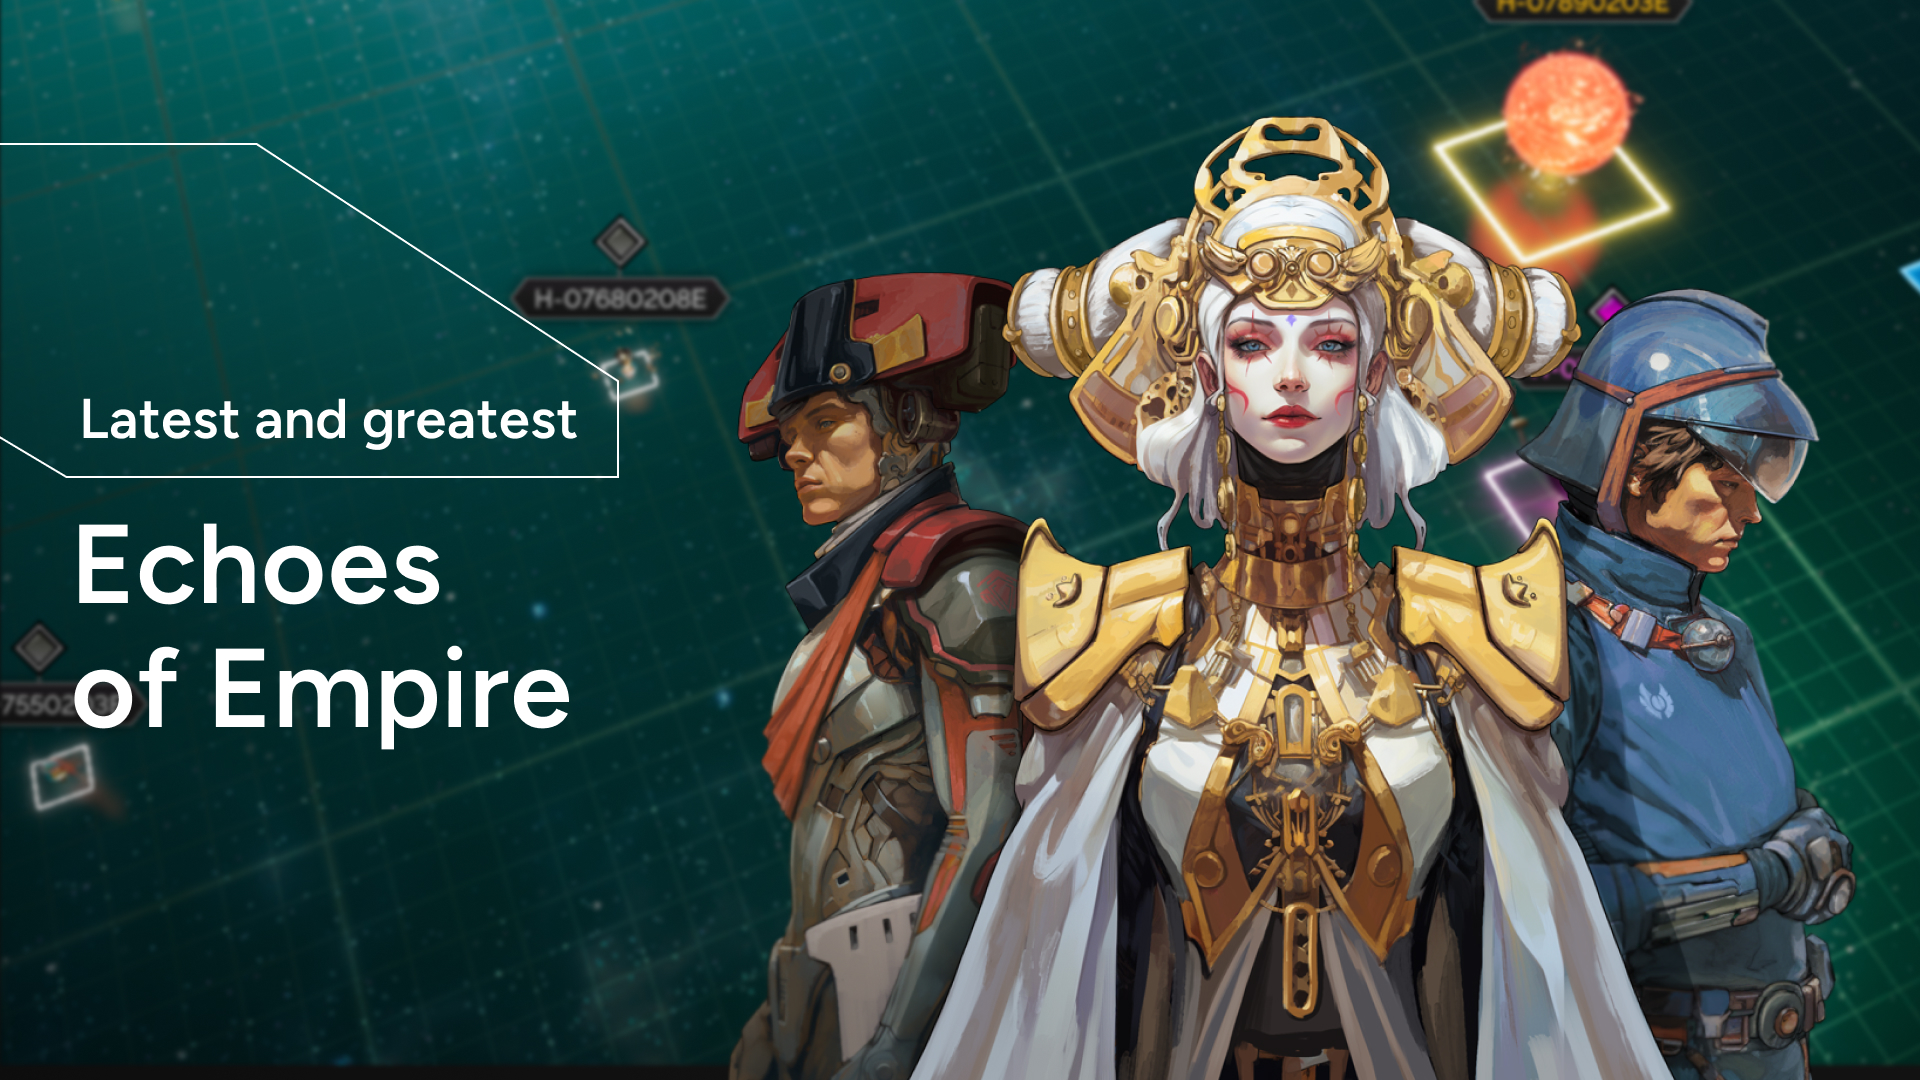 Echoes of Empire is a web3 ownership enabled space adventure 4x game from Ion Games and Gala.